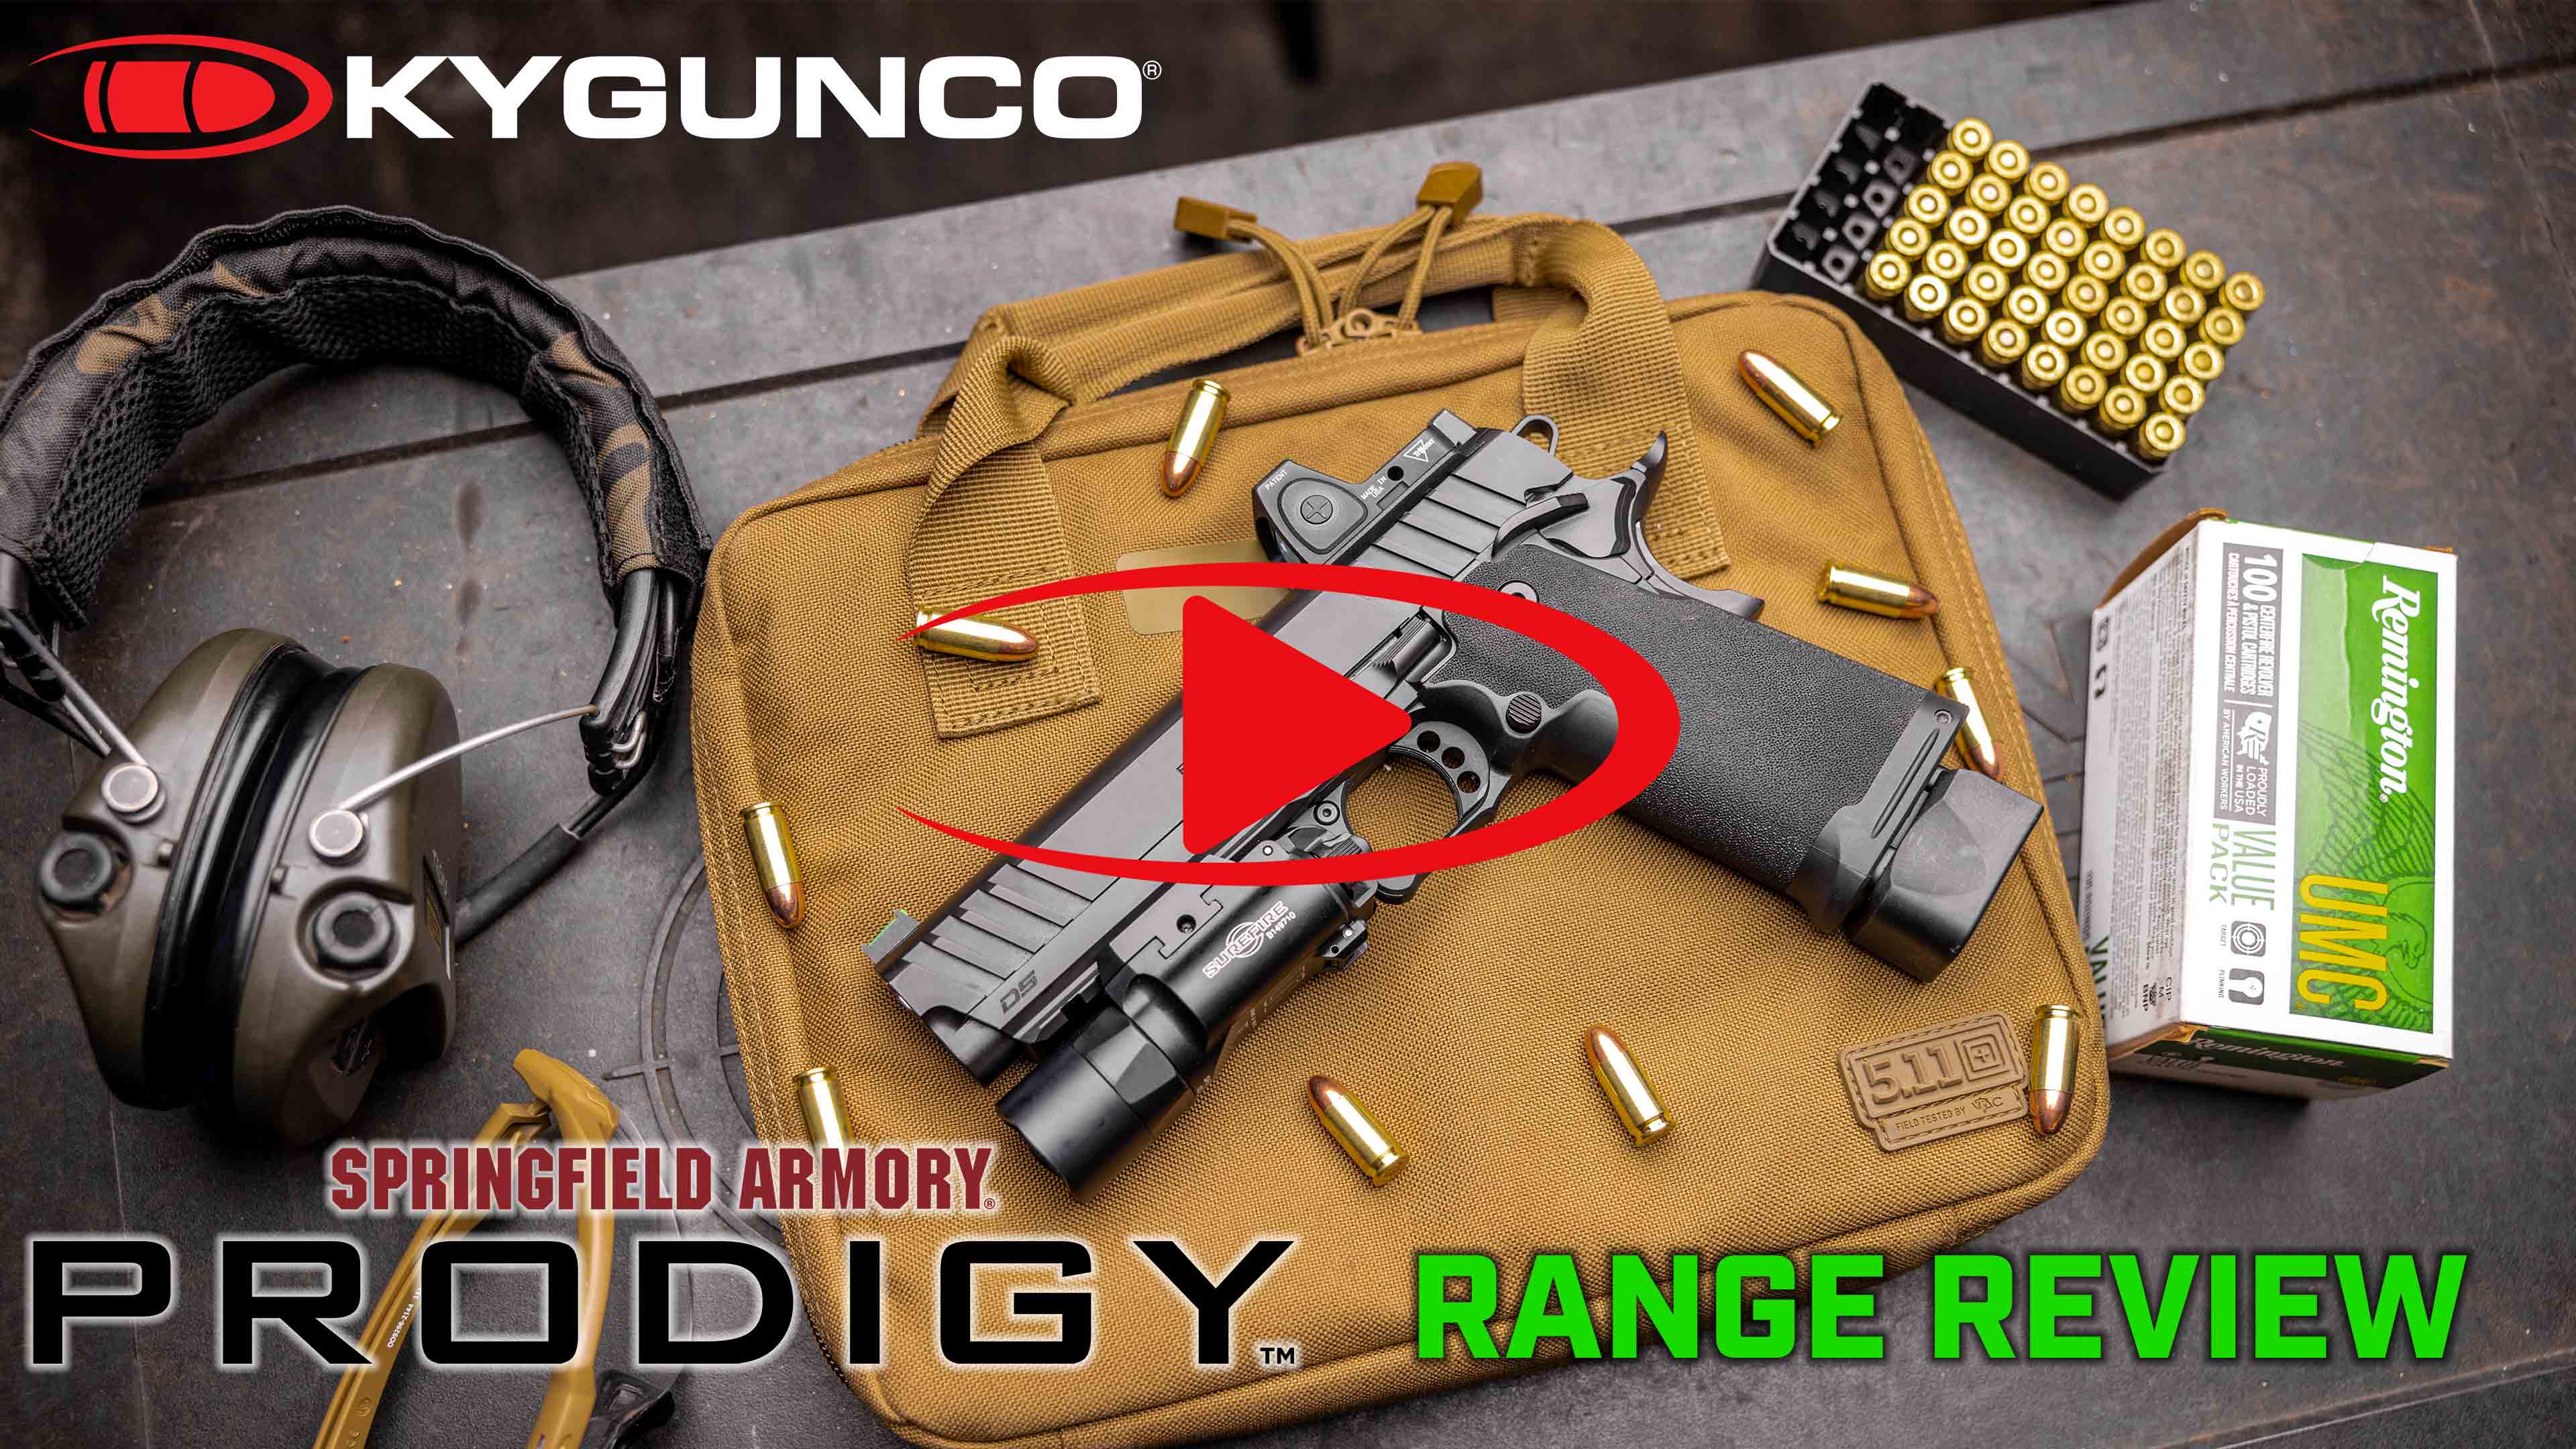 springfield-armory-1911-ds-prodigy-range-review-kygunco